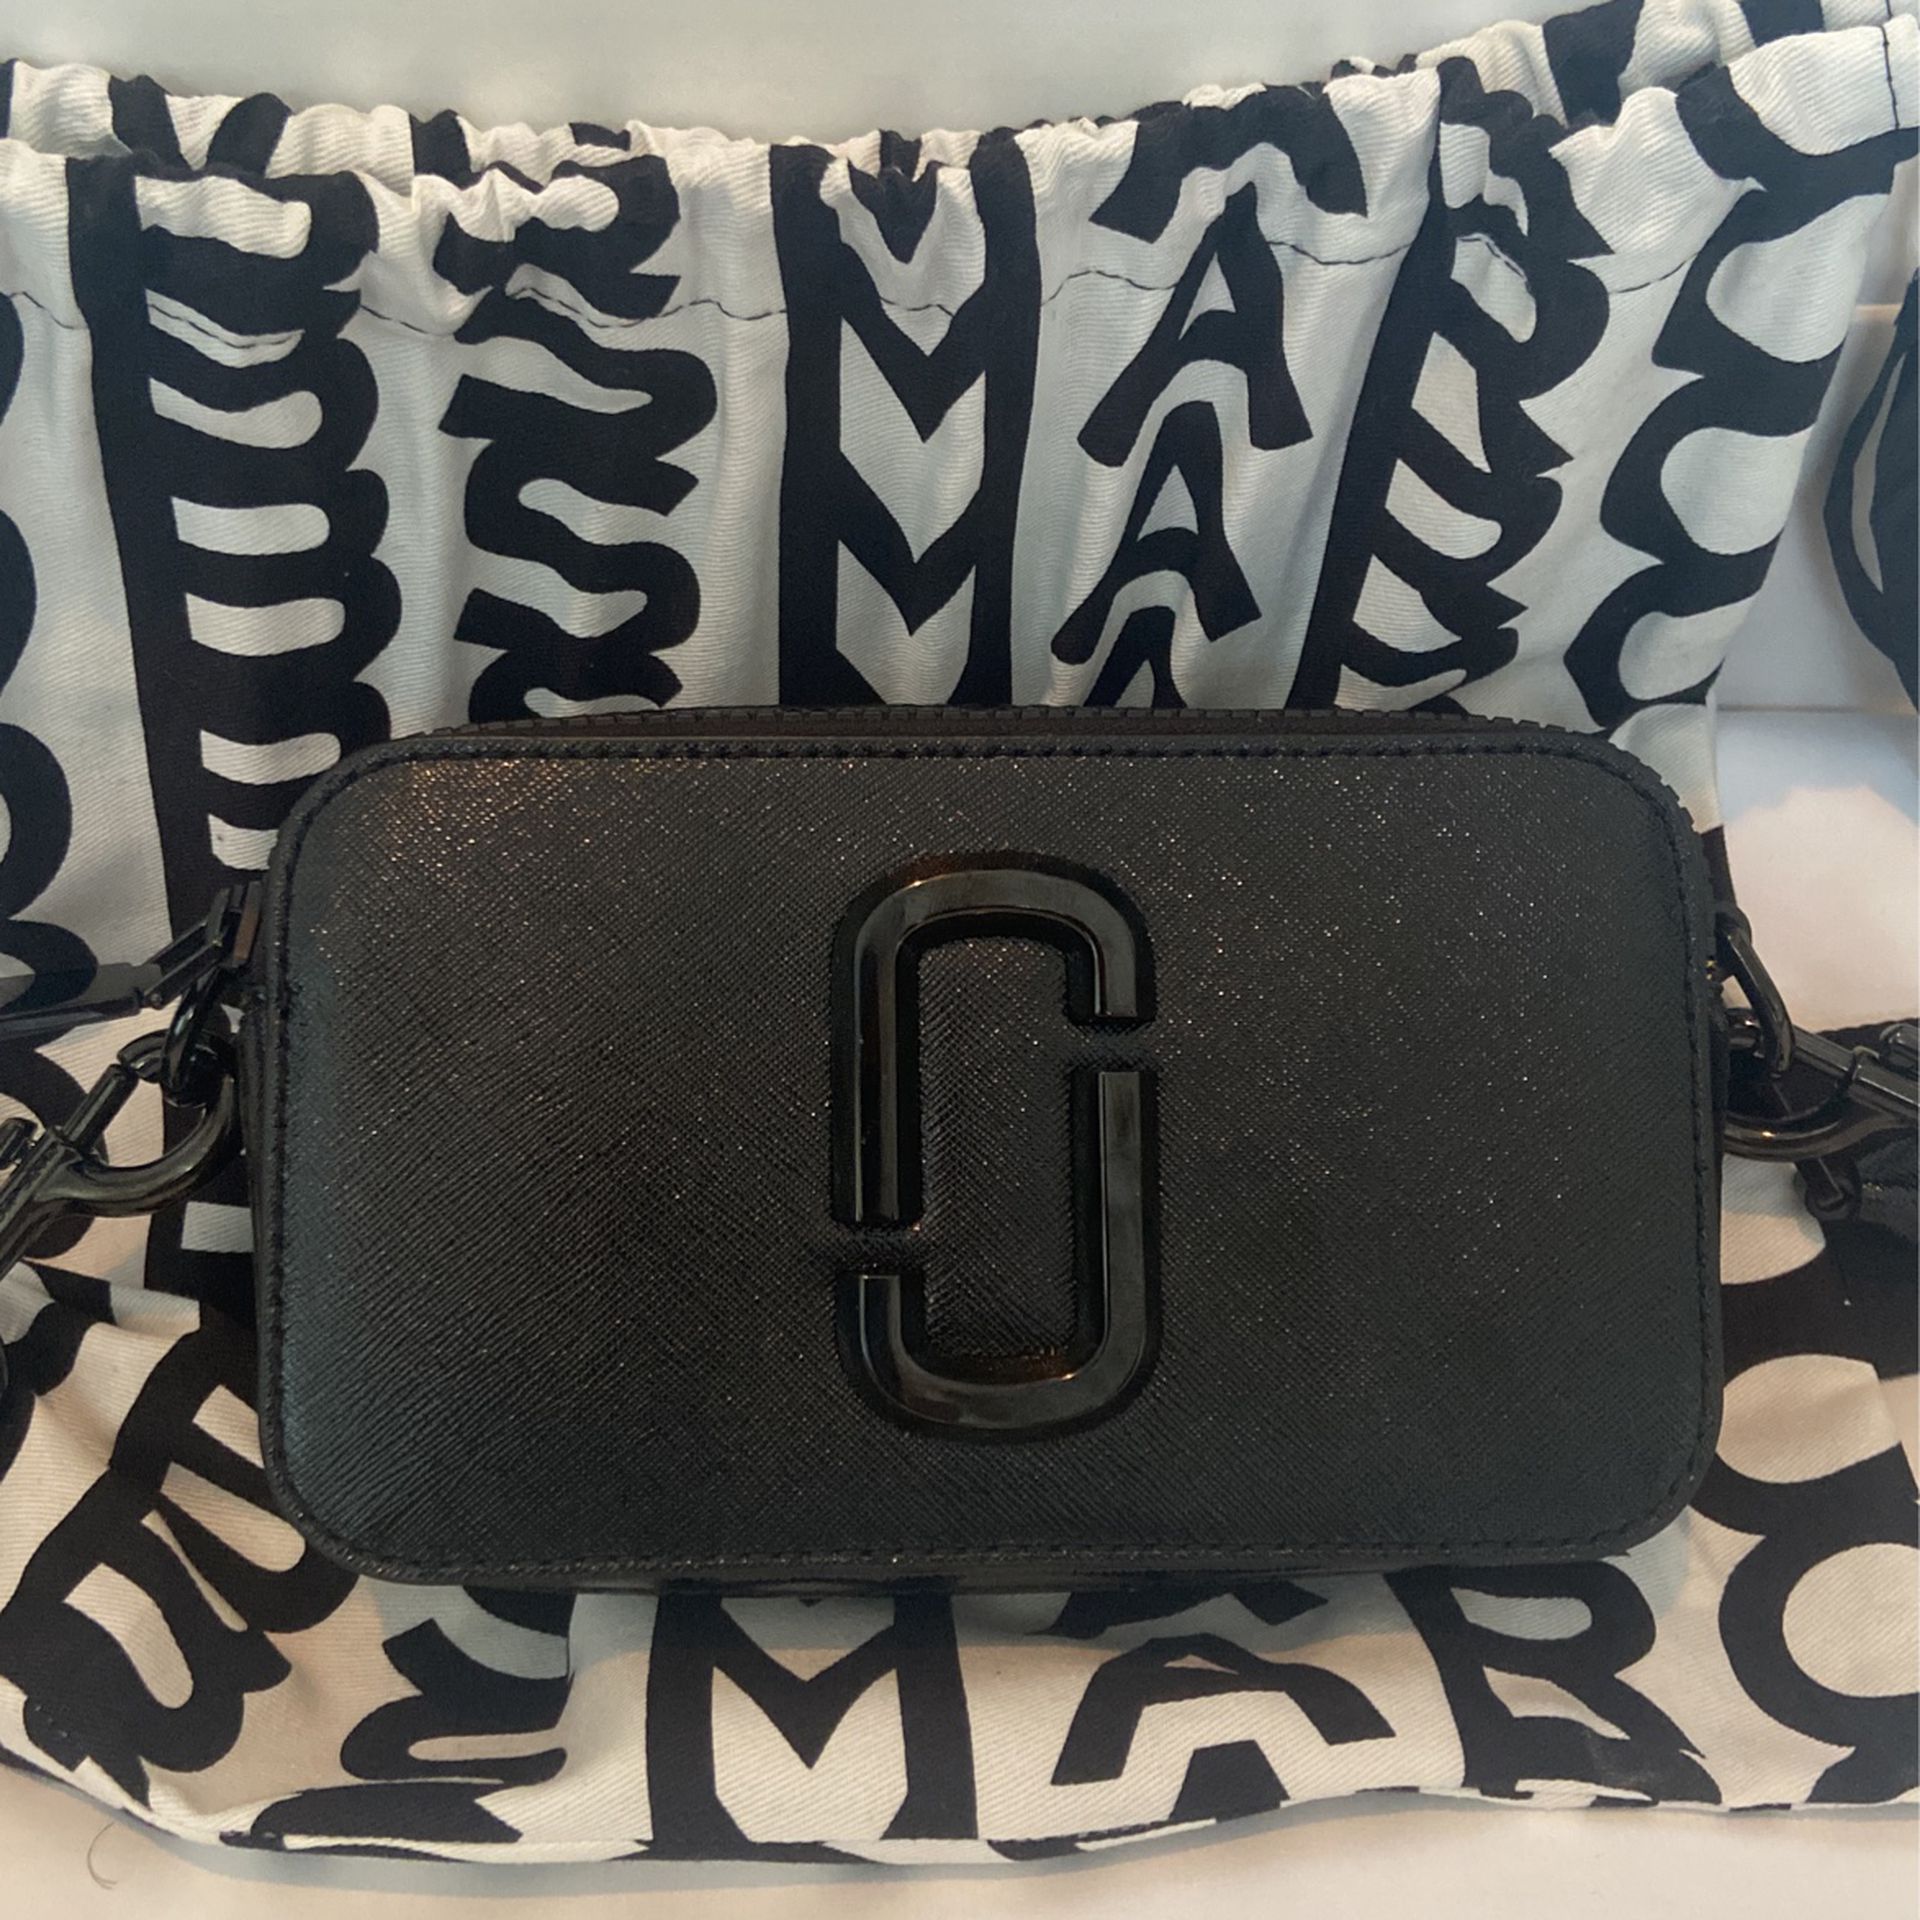 Marc Jacobs / The Snapshot DTM Bag for Sale in Jersey City, NJ - OfferUp